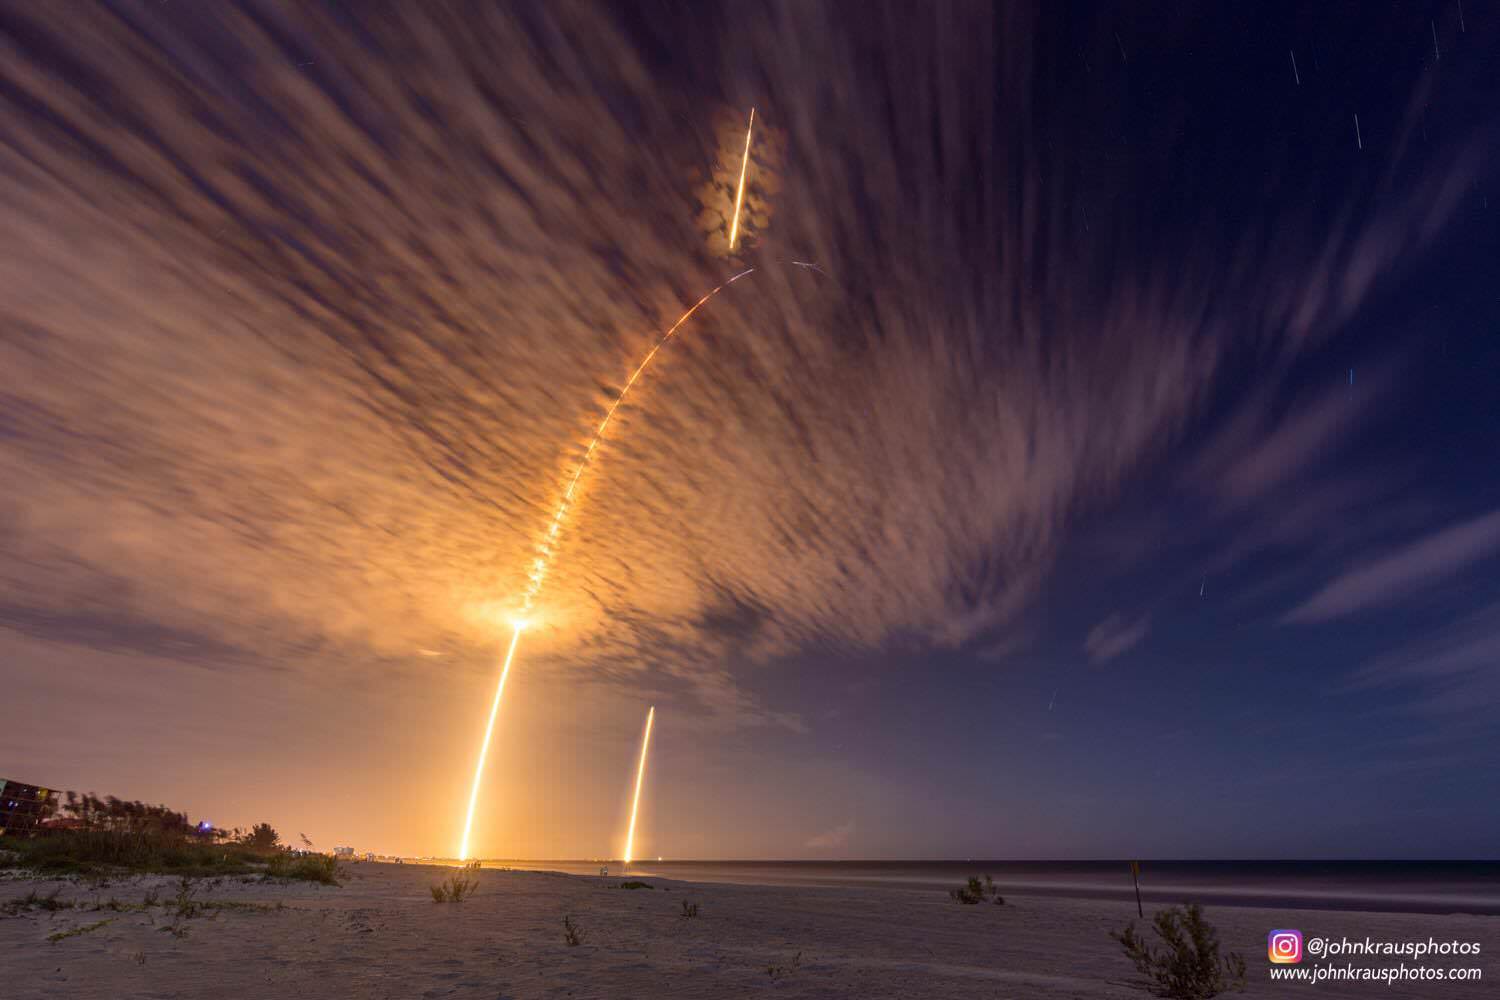 Streak shot of launch and landing of SpaceX Falcon CRS-9 mission from Cape Canaveral Air Force Station, Florida to the ISS on July 18, 2016 at 12:45 a.m. EDT. View from Satellite Beach, FL.  Credit: John Krauss/johnkraussphotos.com 